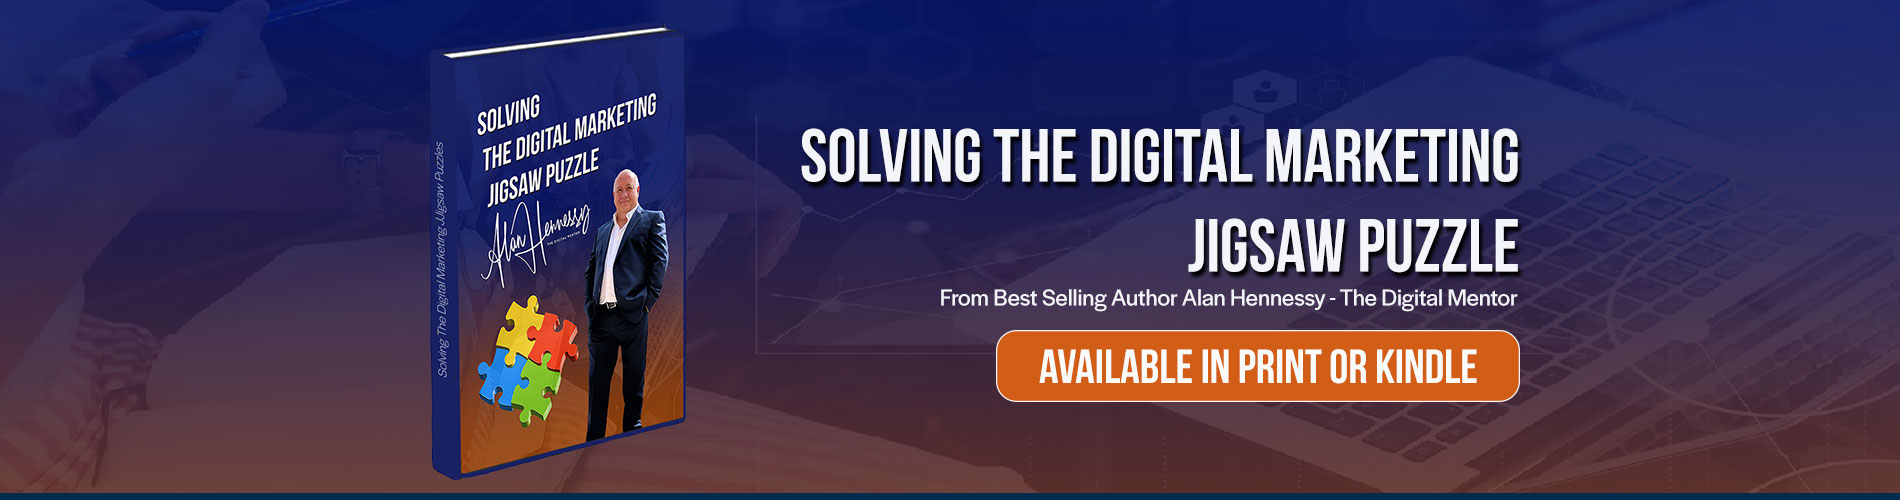 Solving The Digital Marketing Jigsaw Puzzle. Available in Print or Kindle